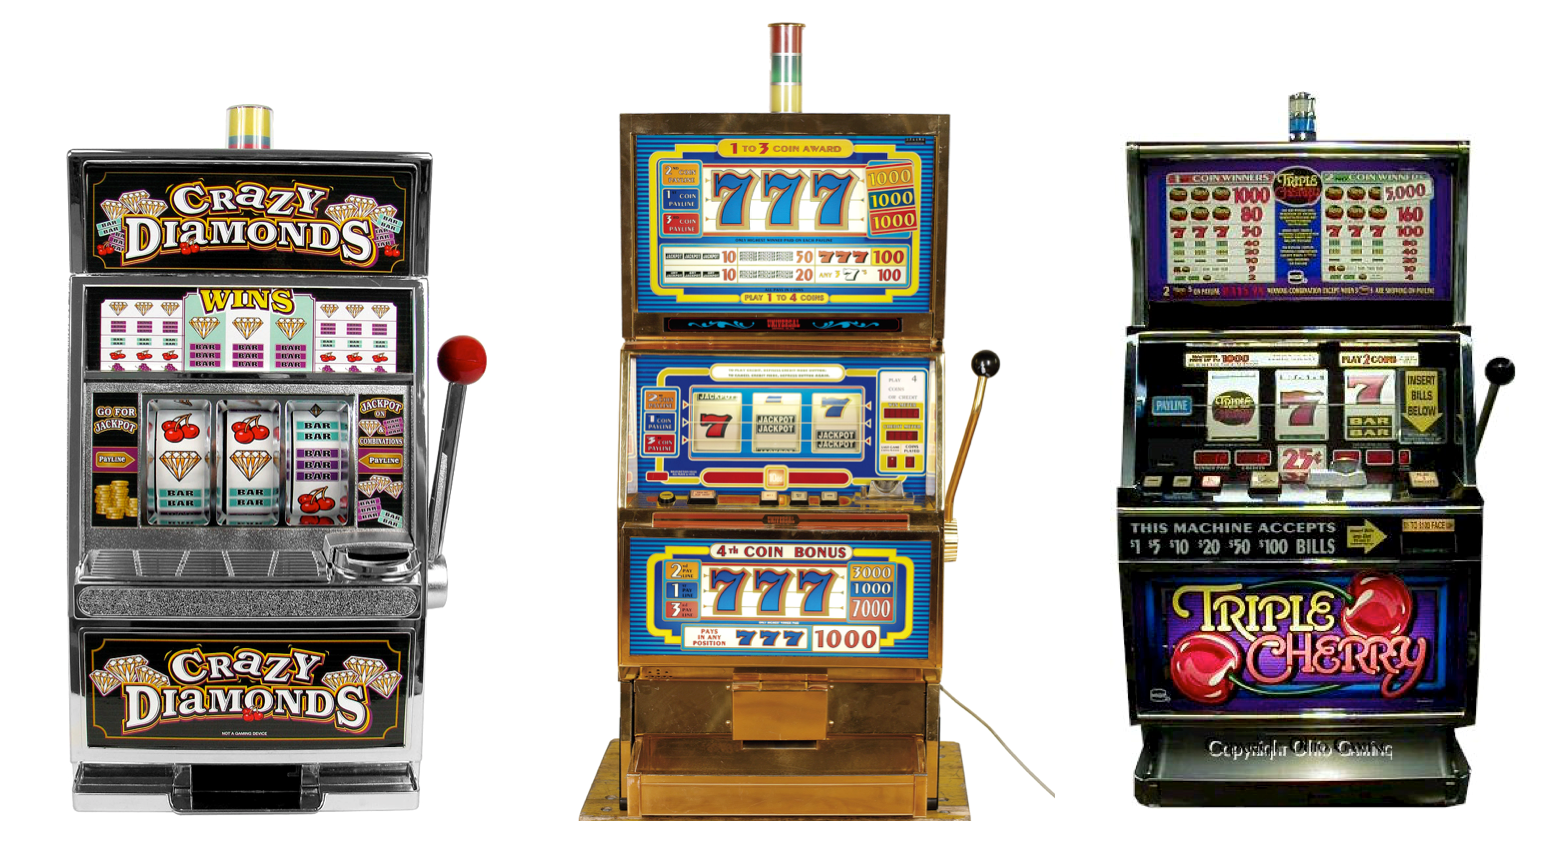 Three slot machines create a 3-armed bandit with uncertain payoffs for each option.